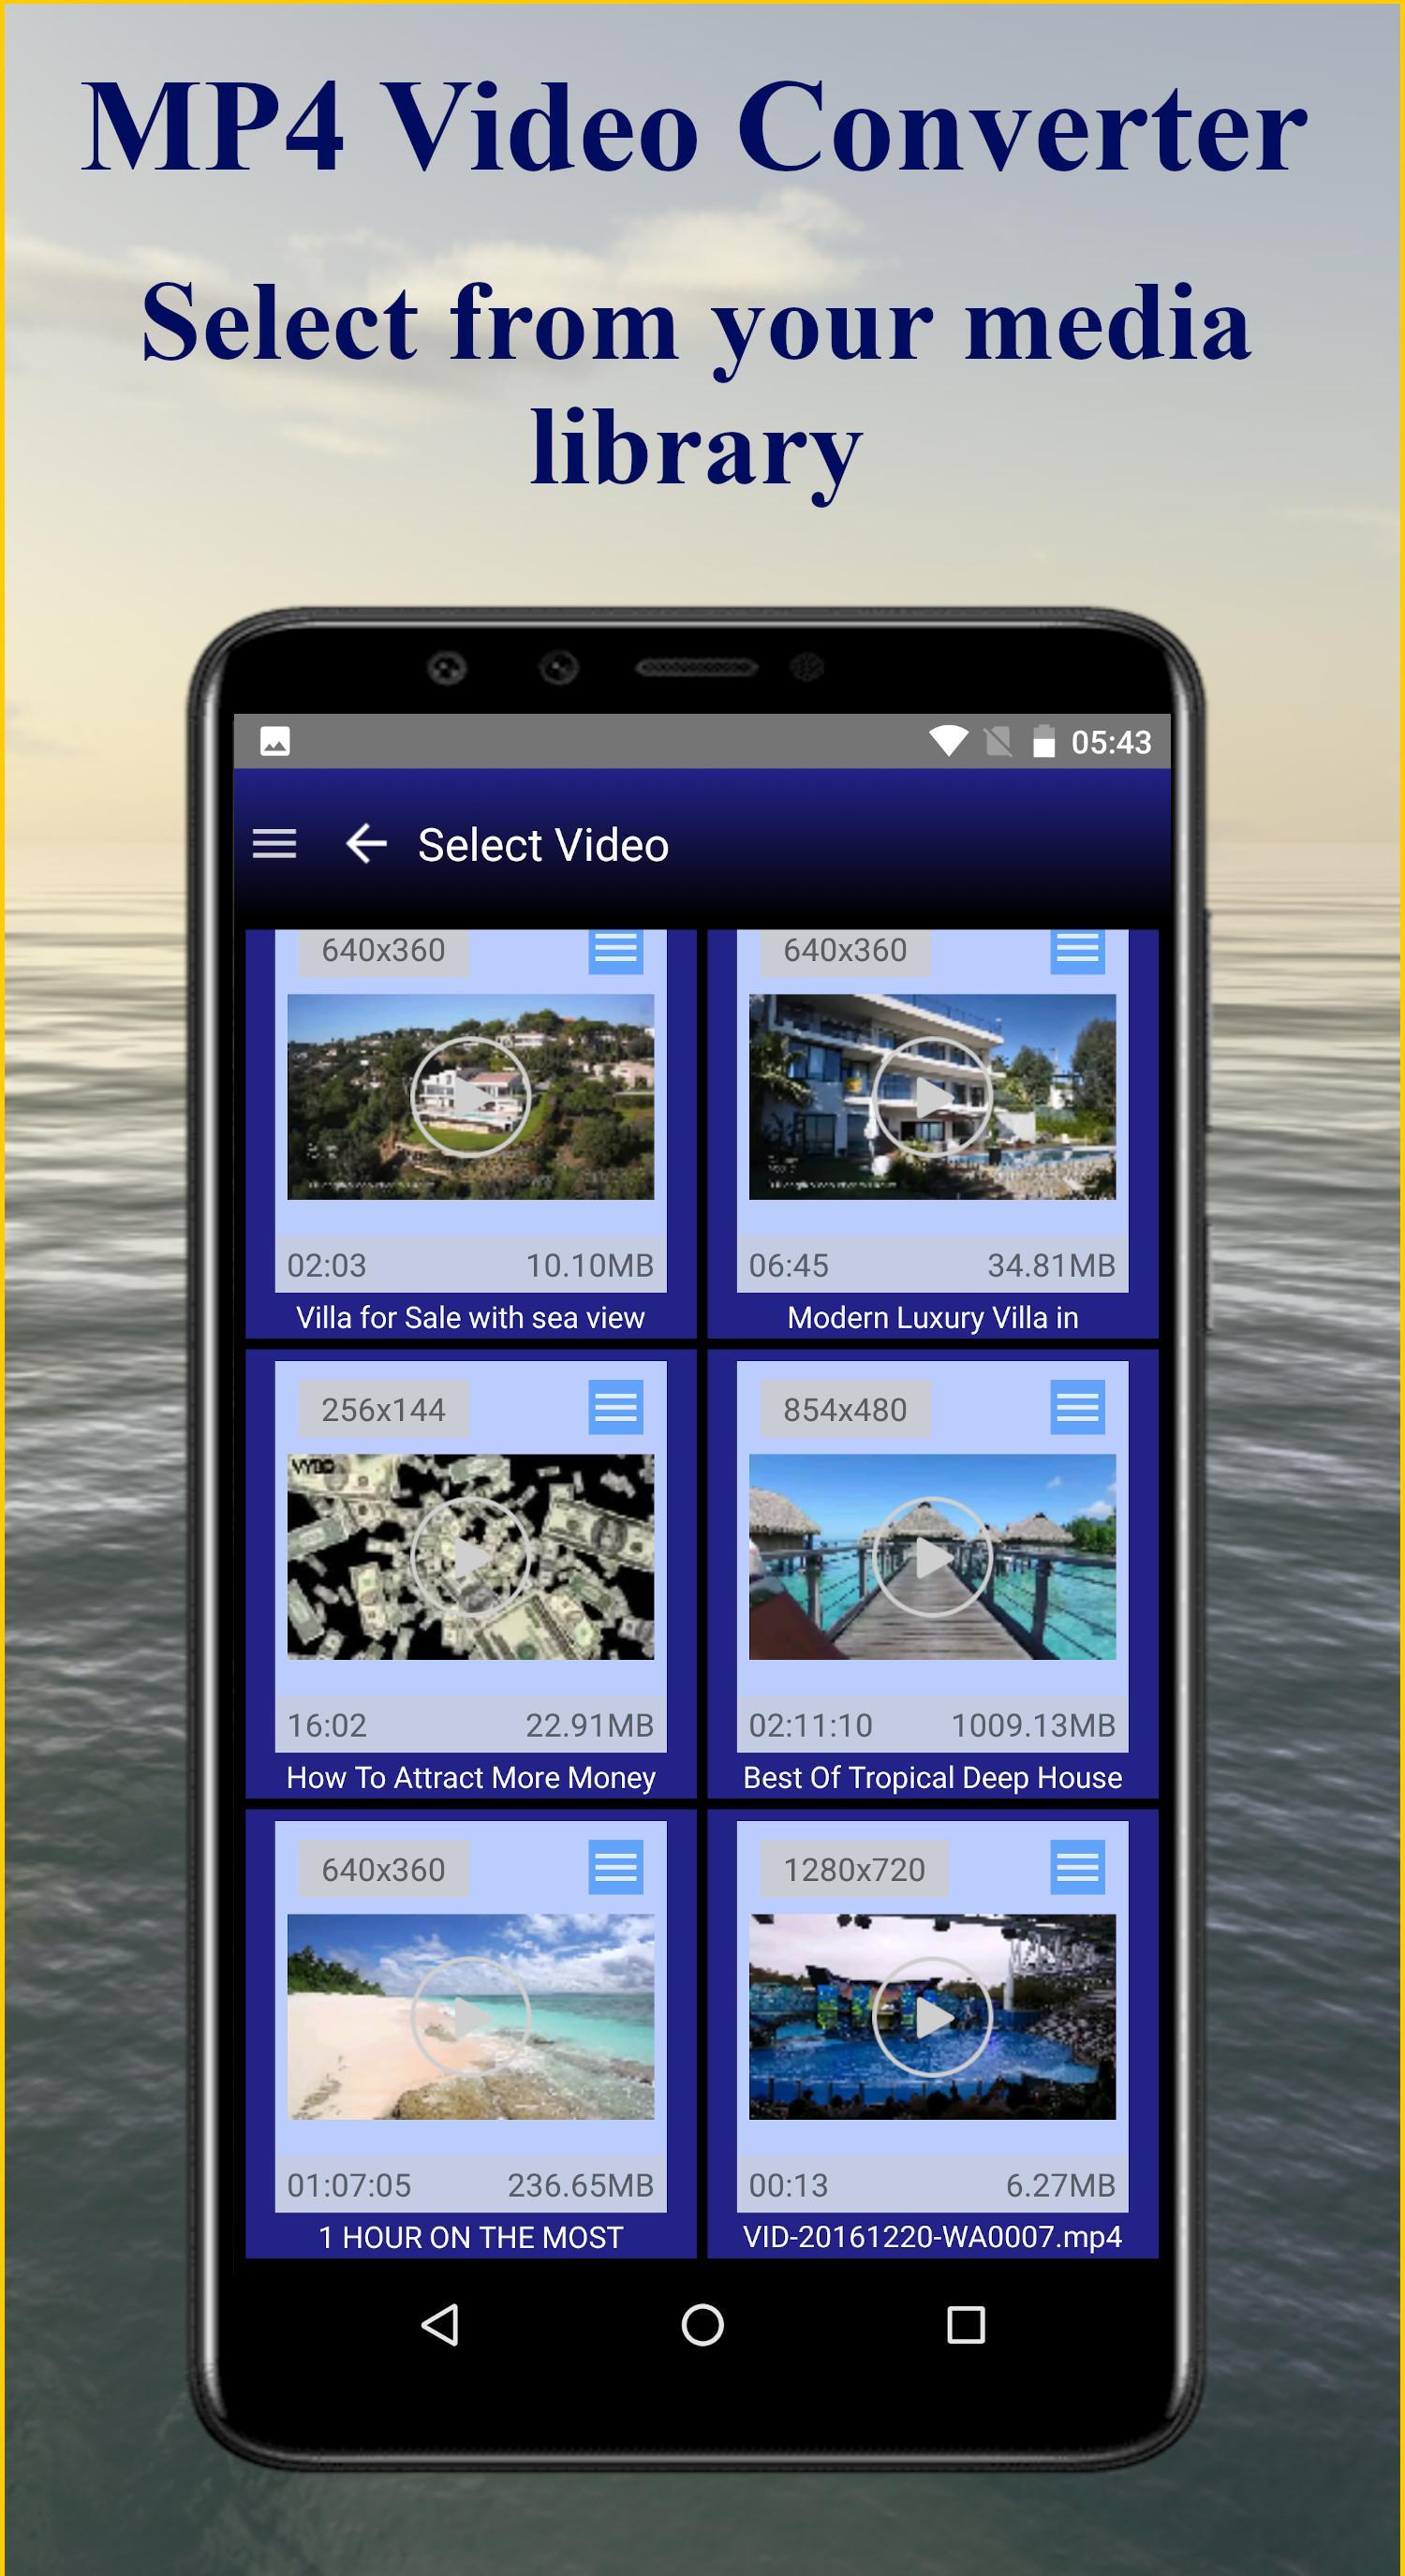 Mp4 Video Converter for Android - APK Download